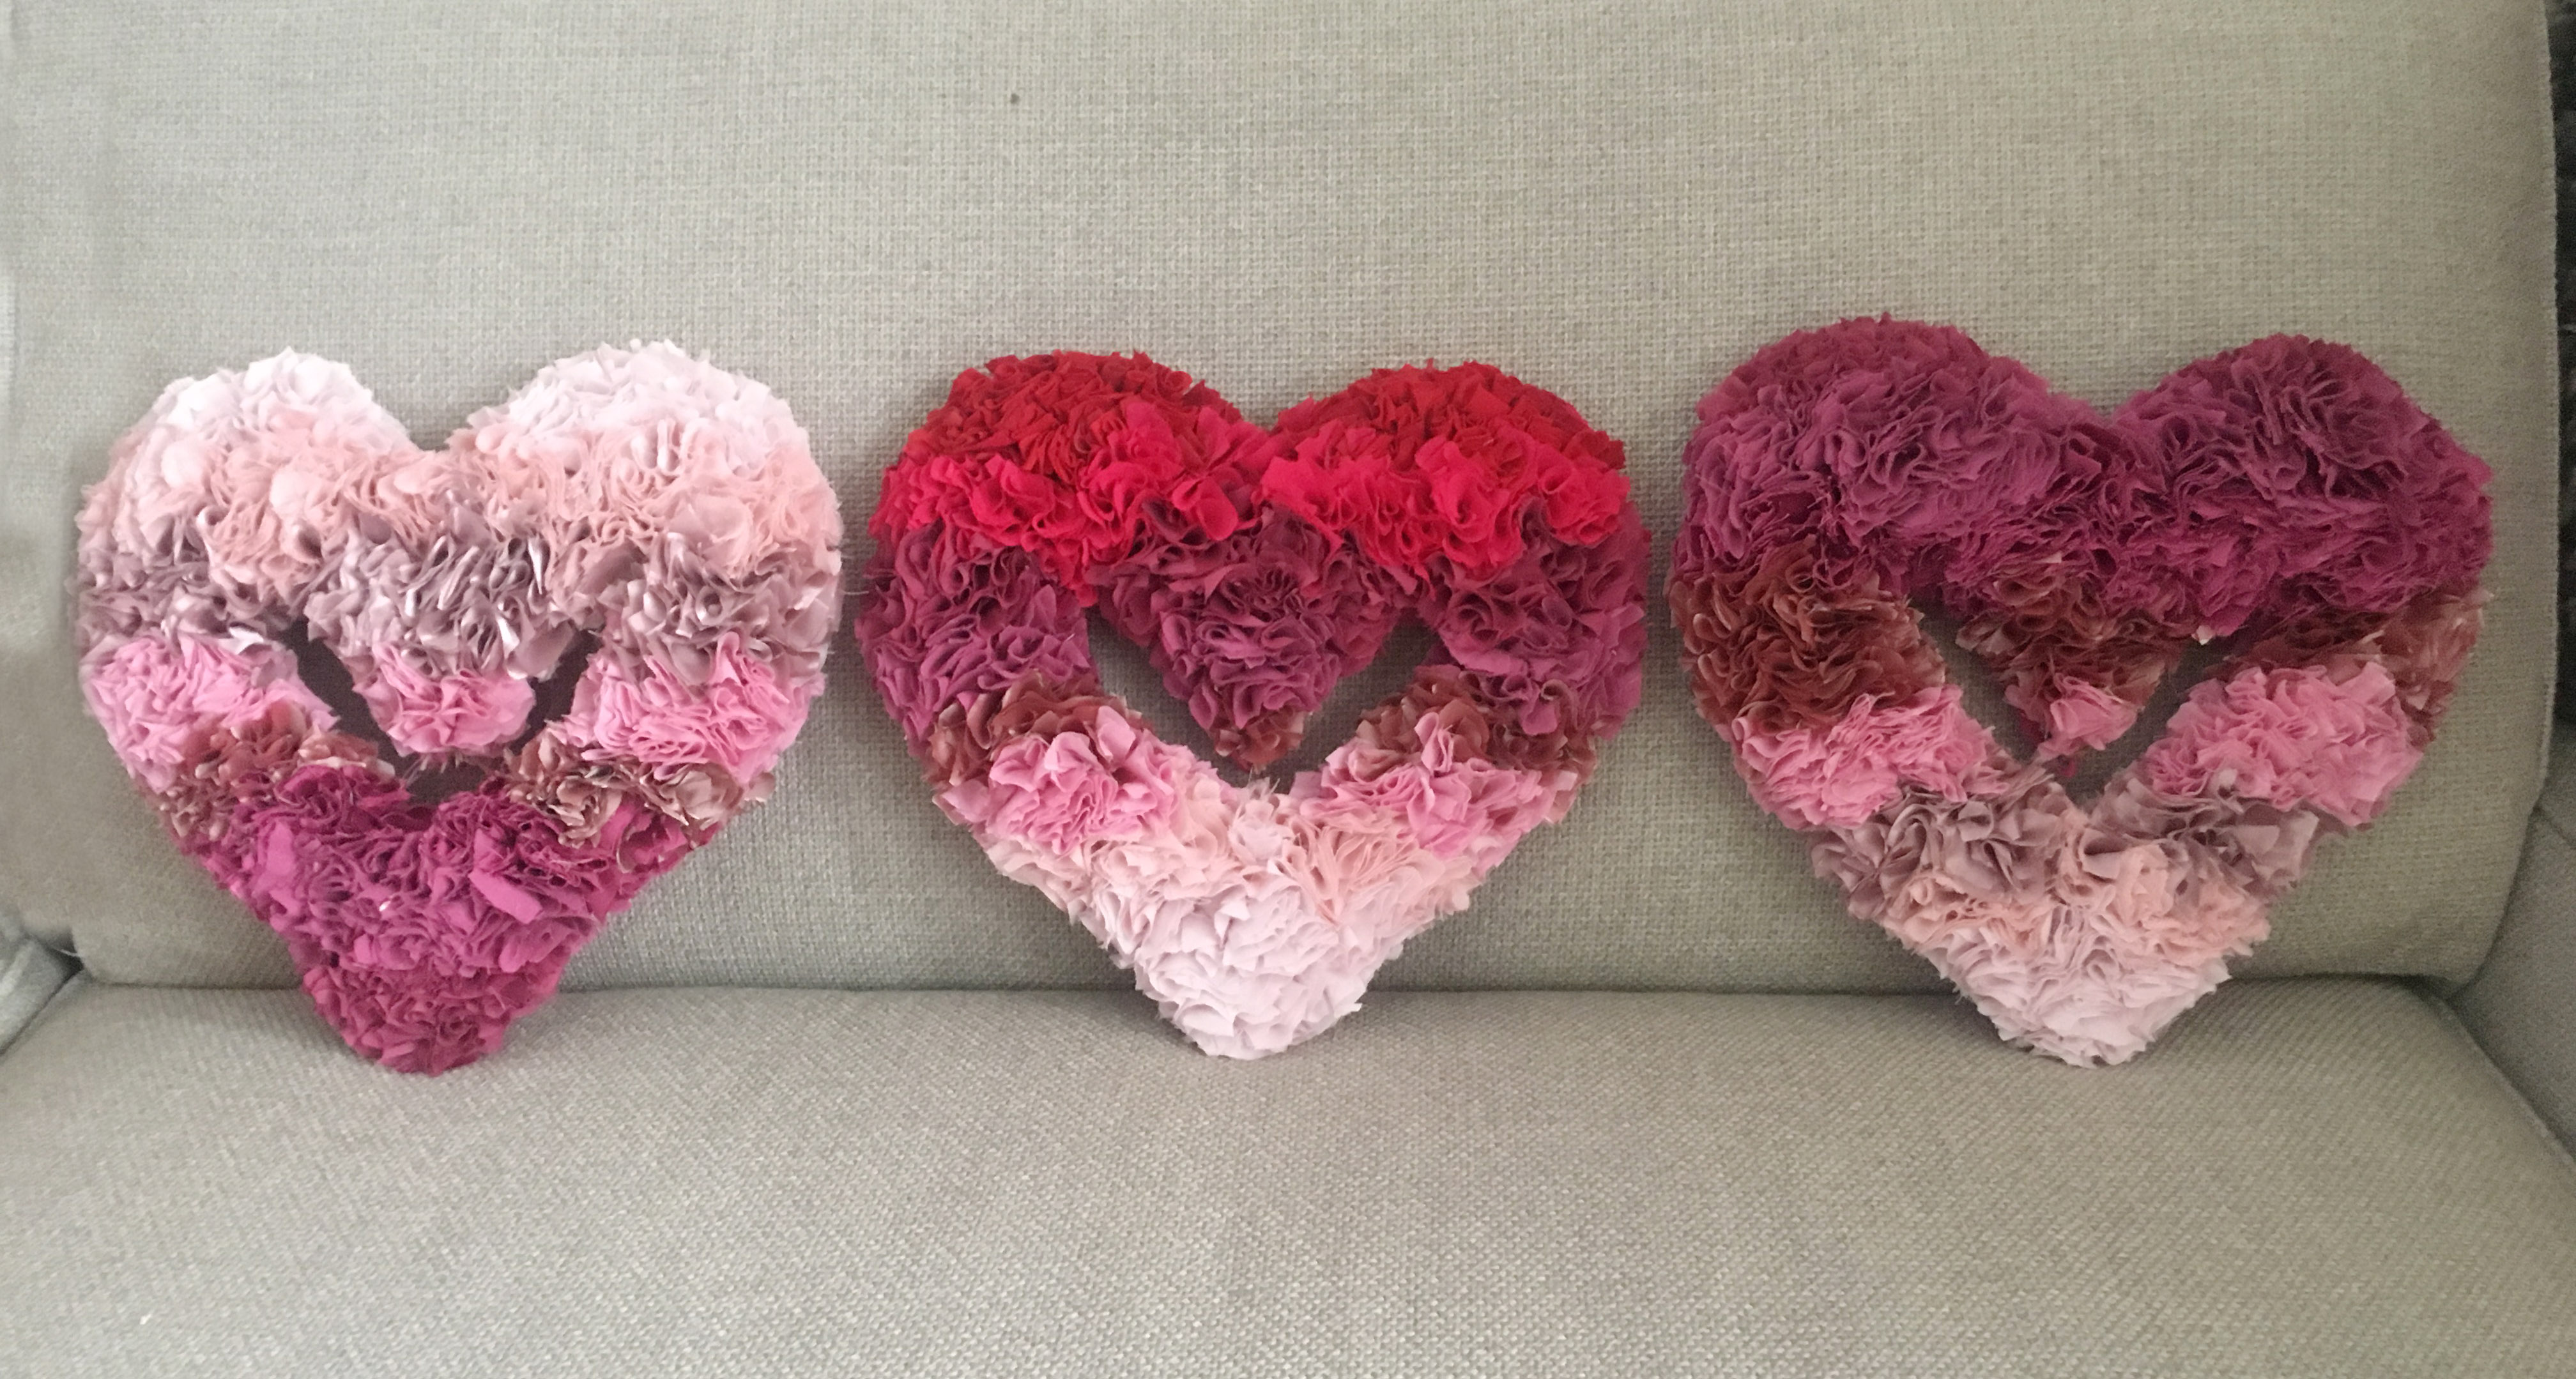 Gradiated Pink and Red Rag Rug Heart Wreaths on Grey Sofa 